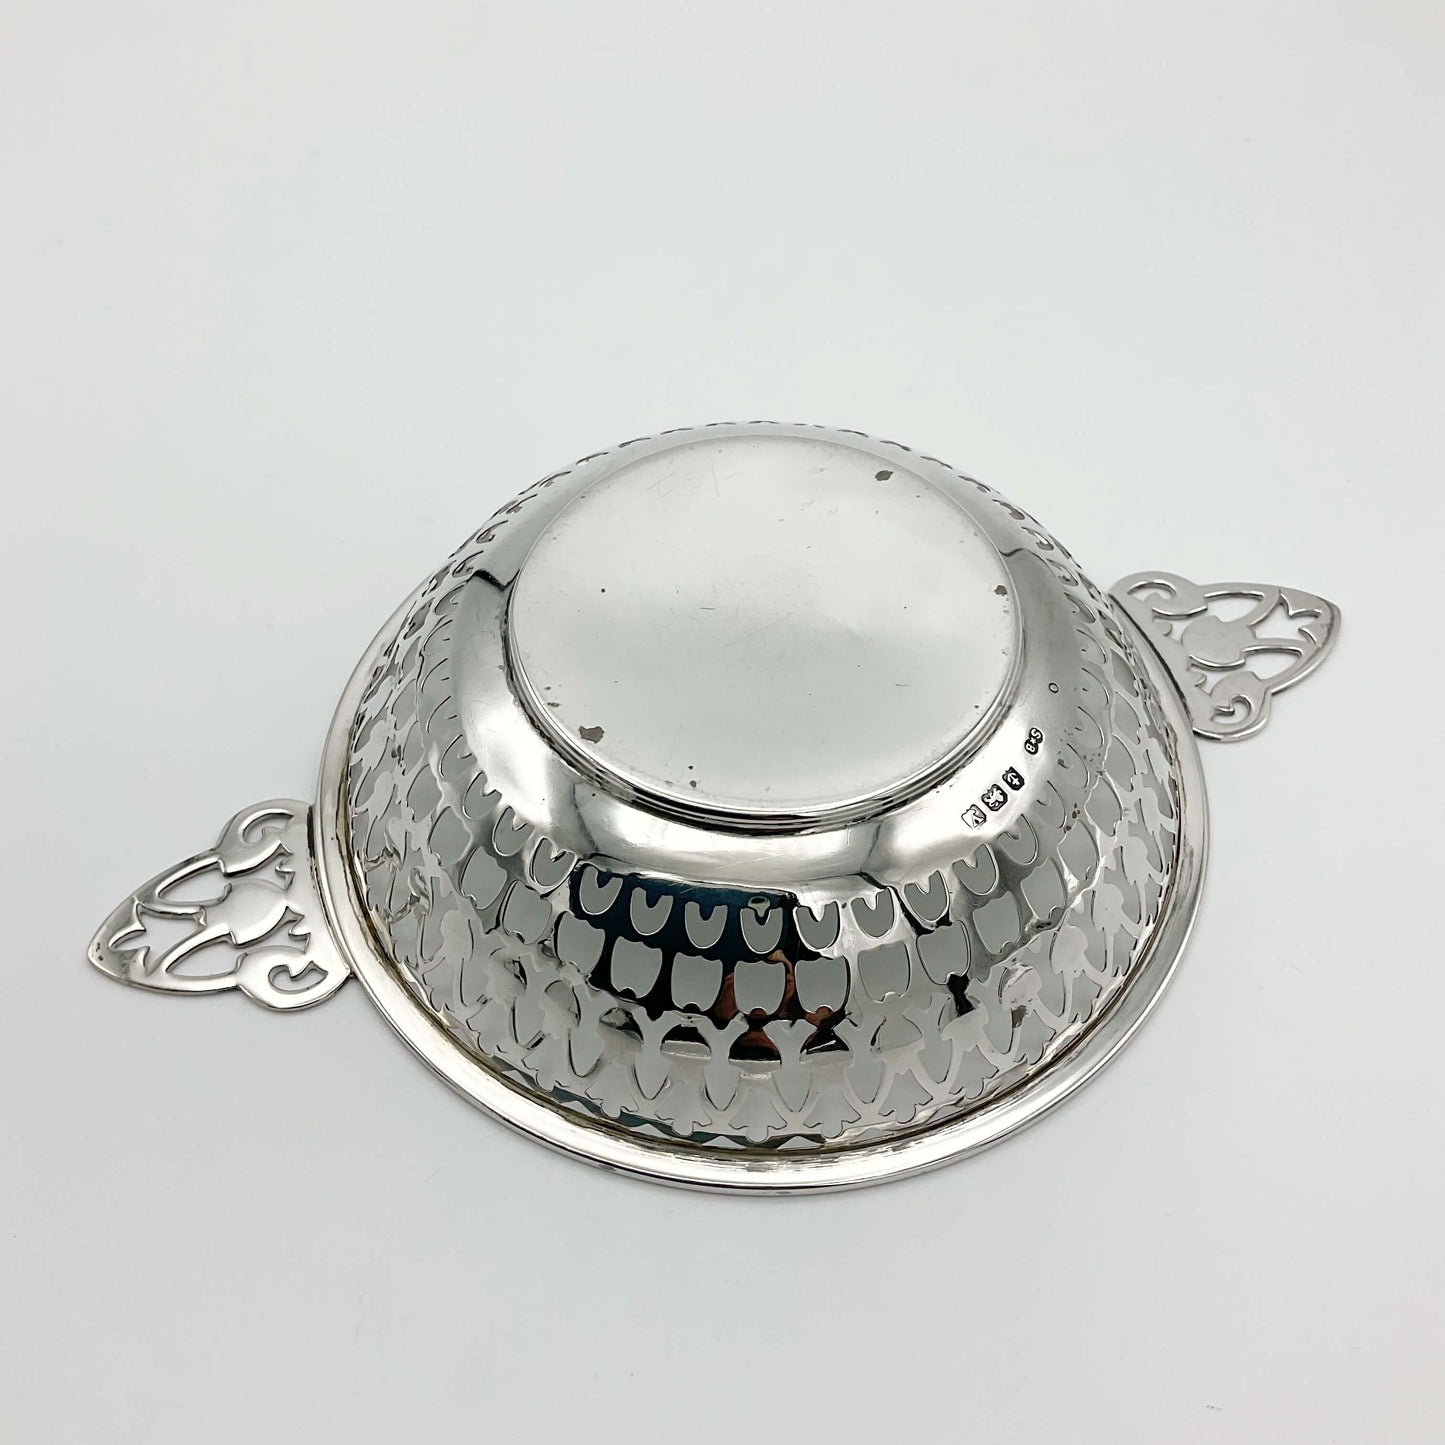 Base of silver bowl with handles showing hallmarks